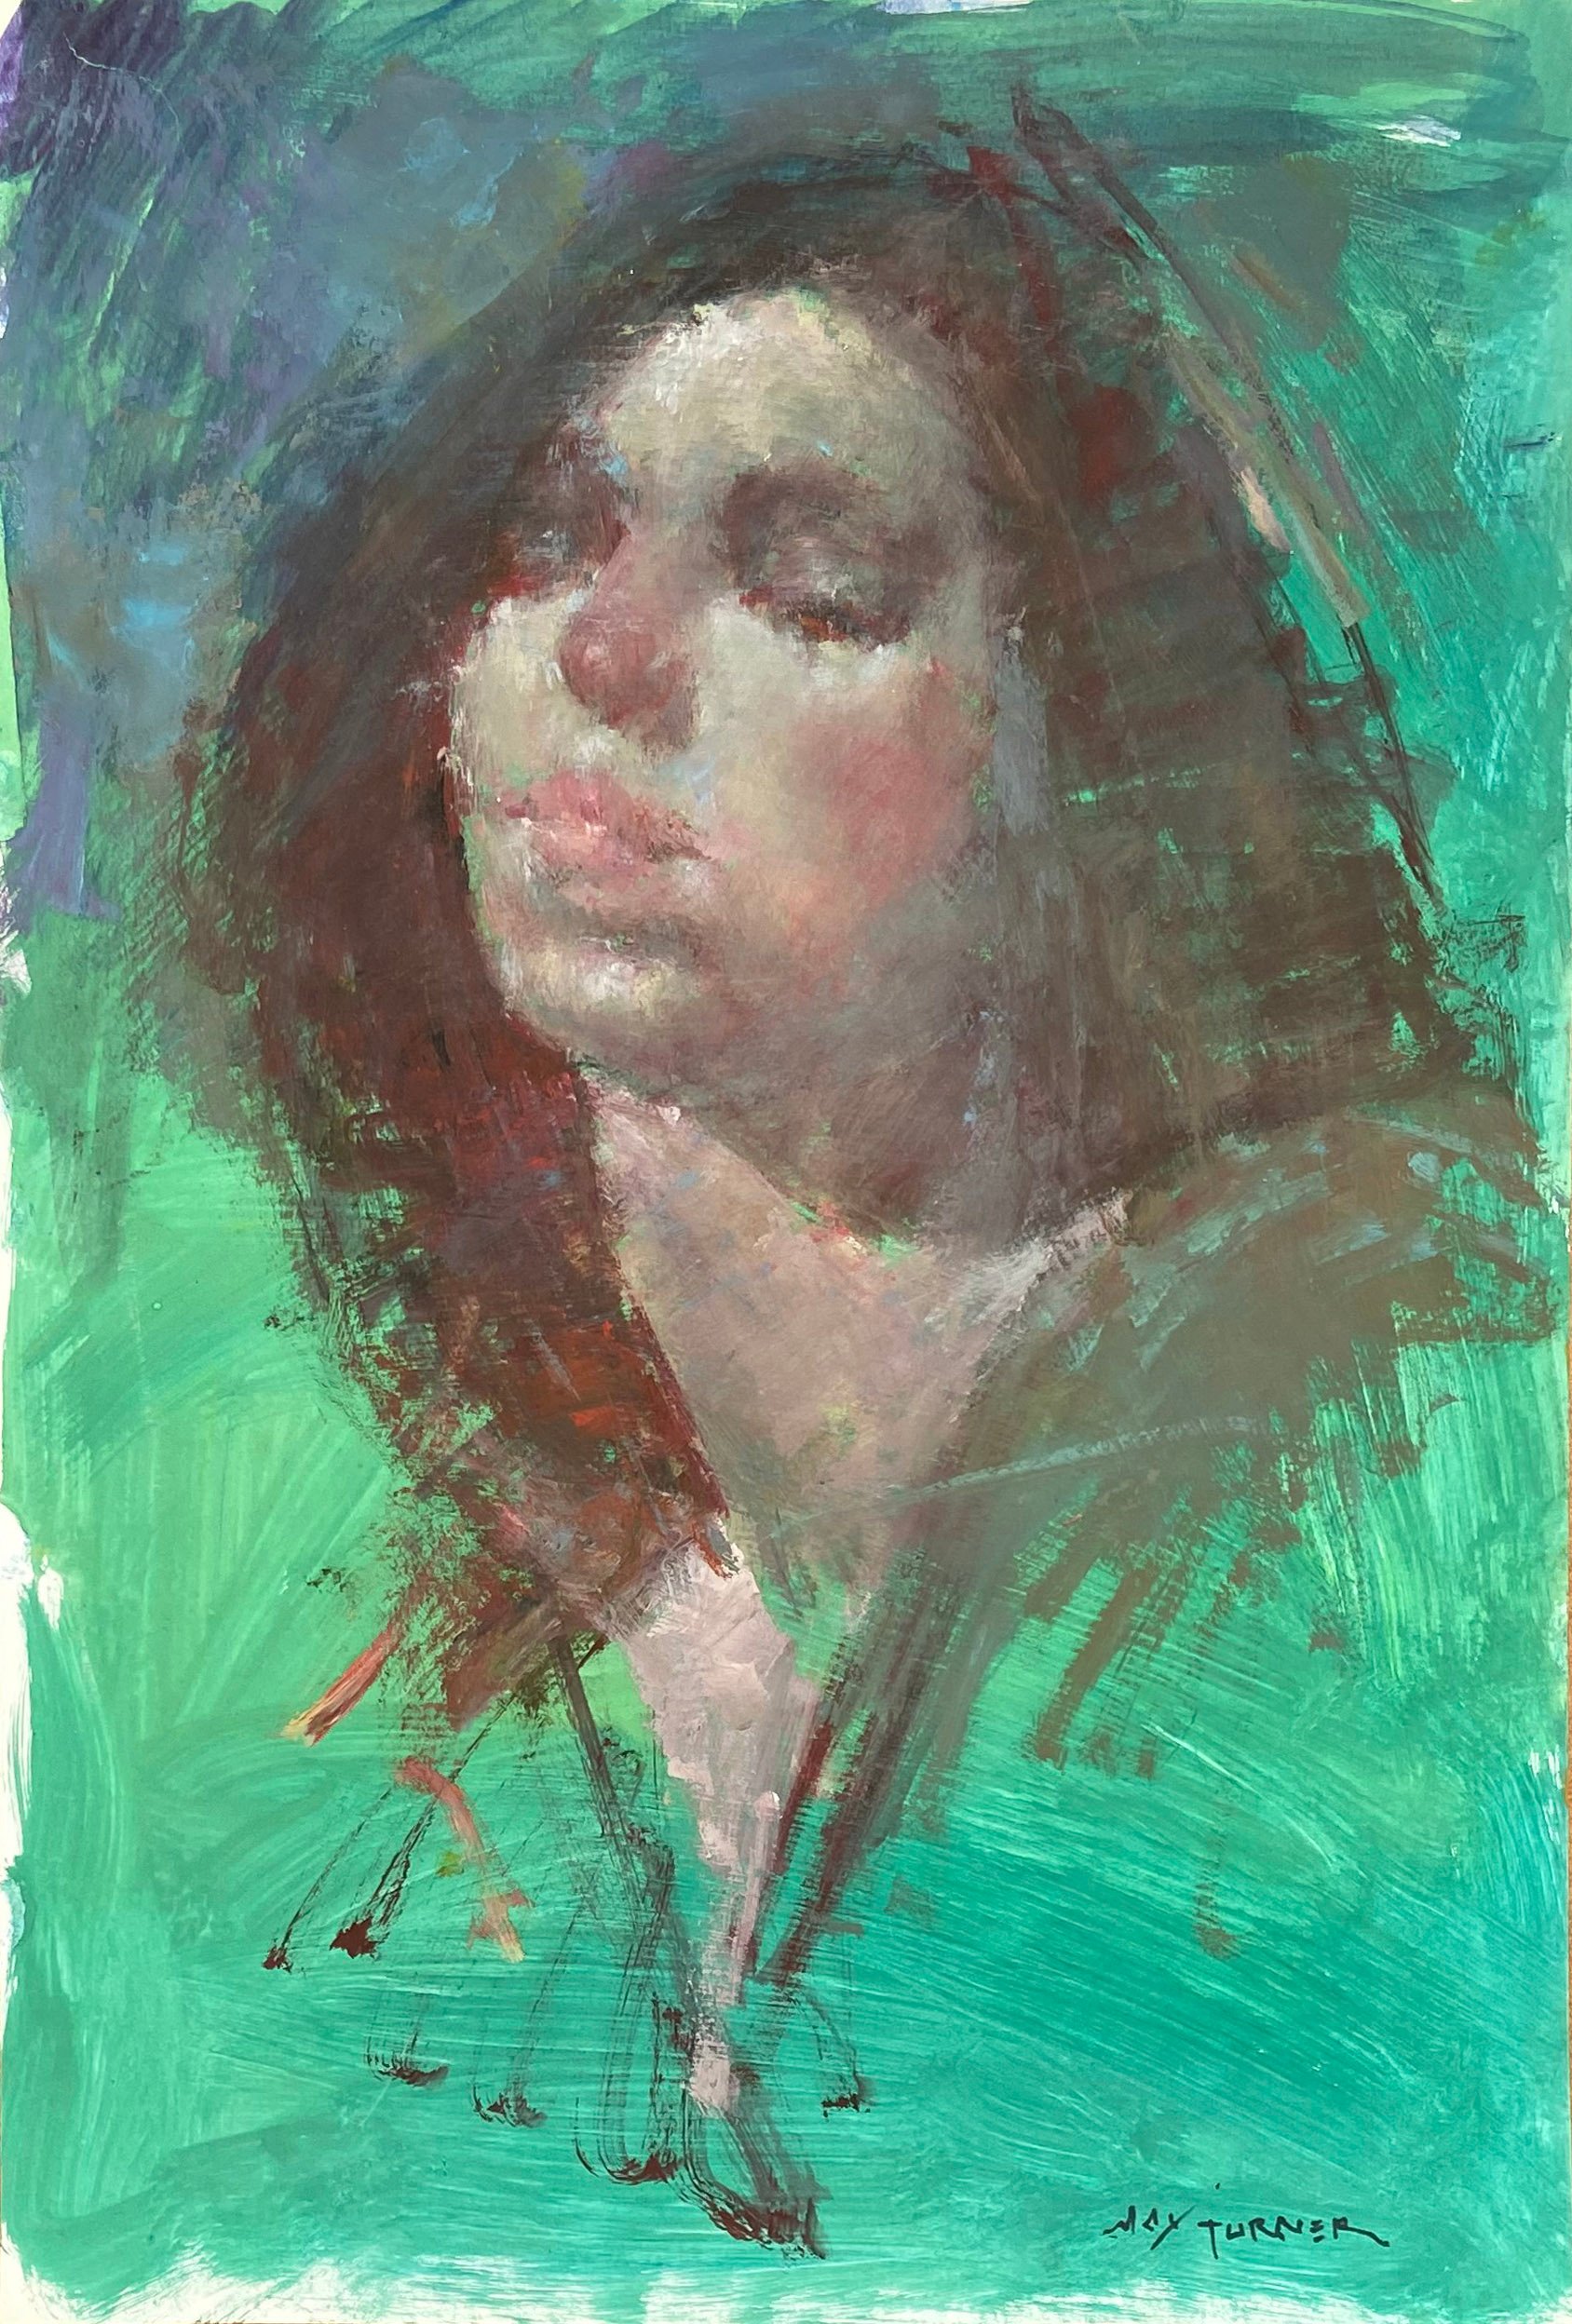 Woman in Teal by Max Turner, 1960s~P77605559